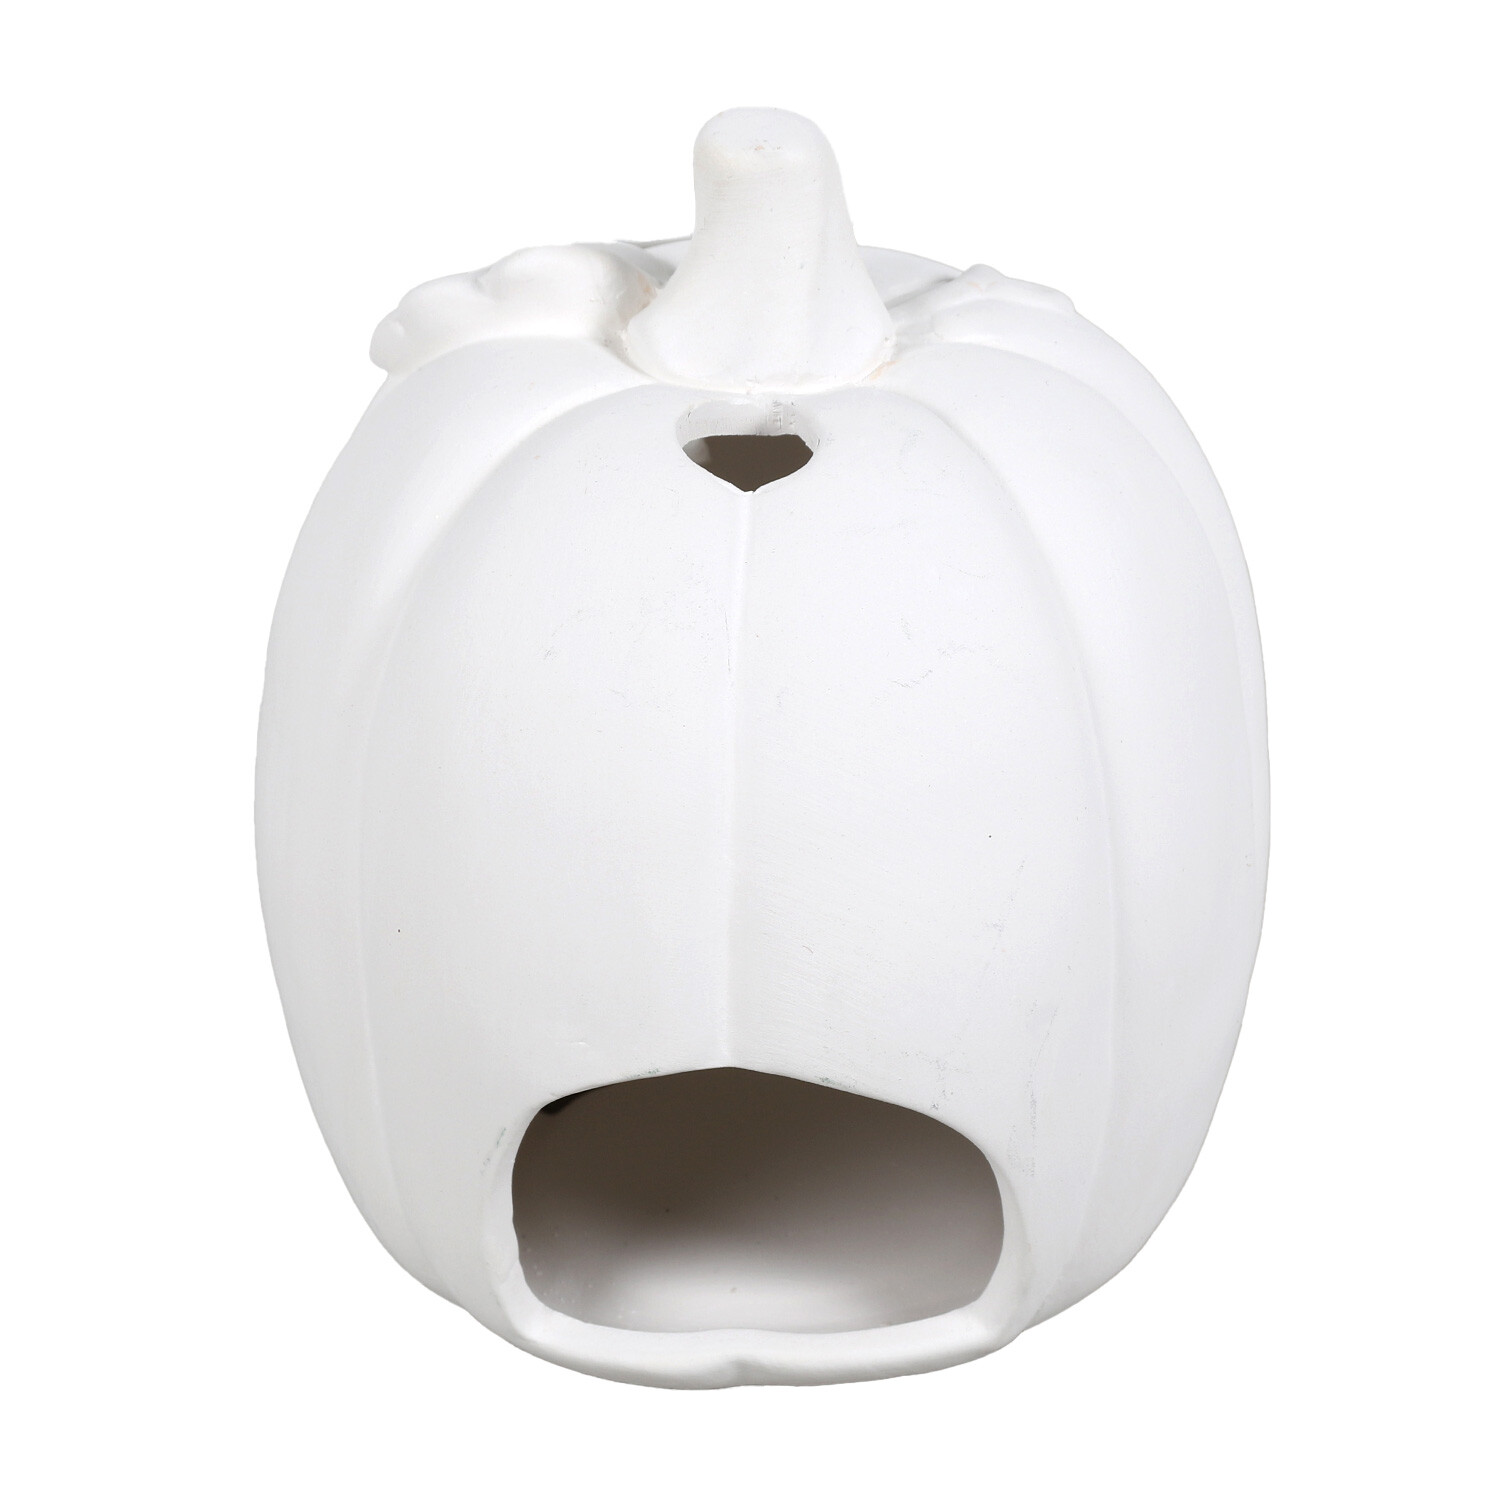 Paint Your Own Ceramic Pumpkin House - White Image 3